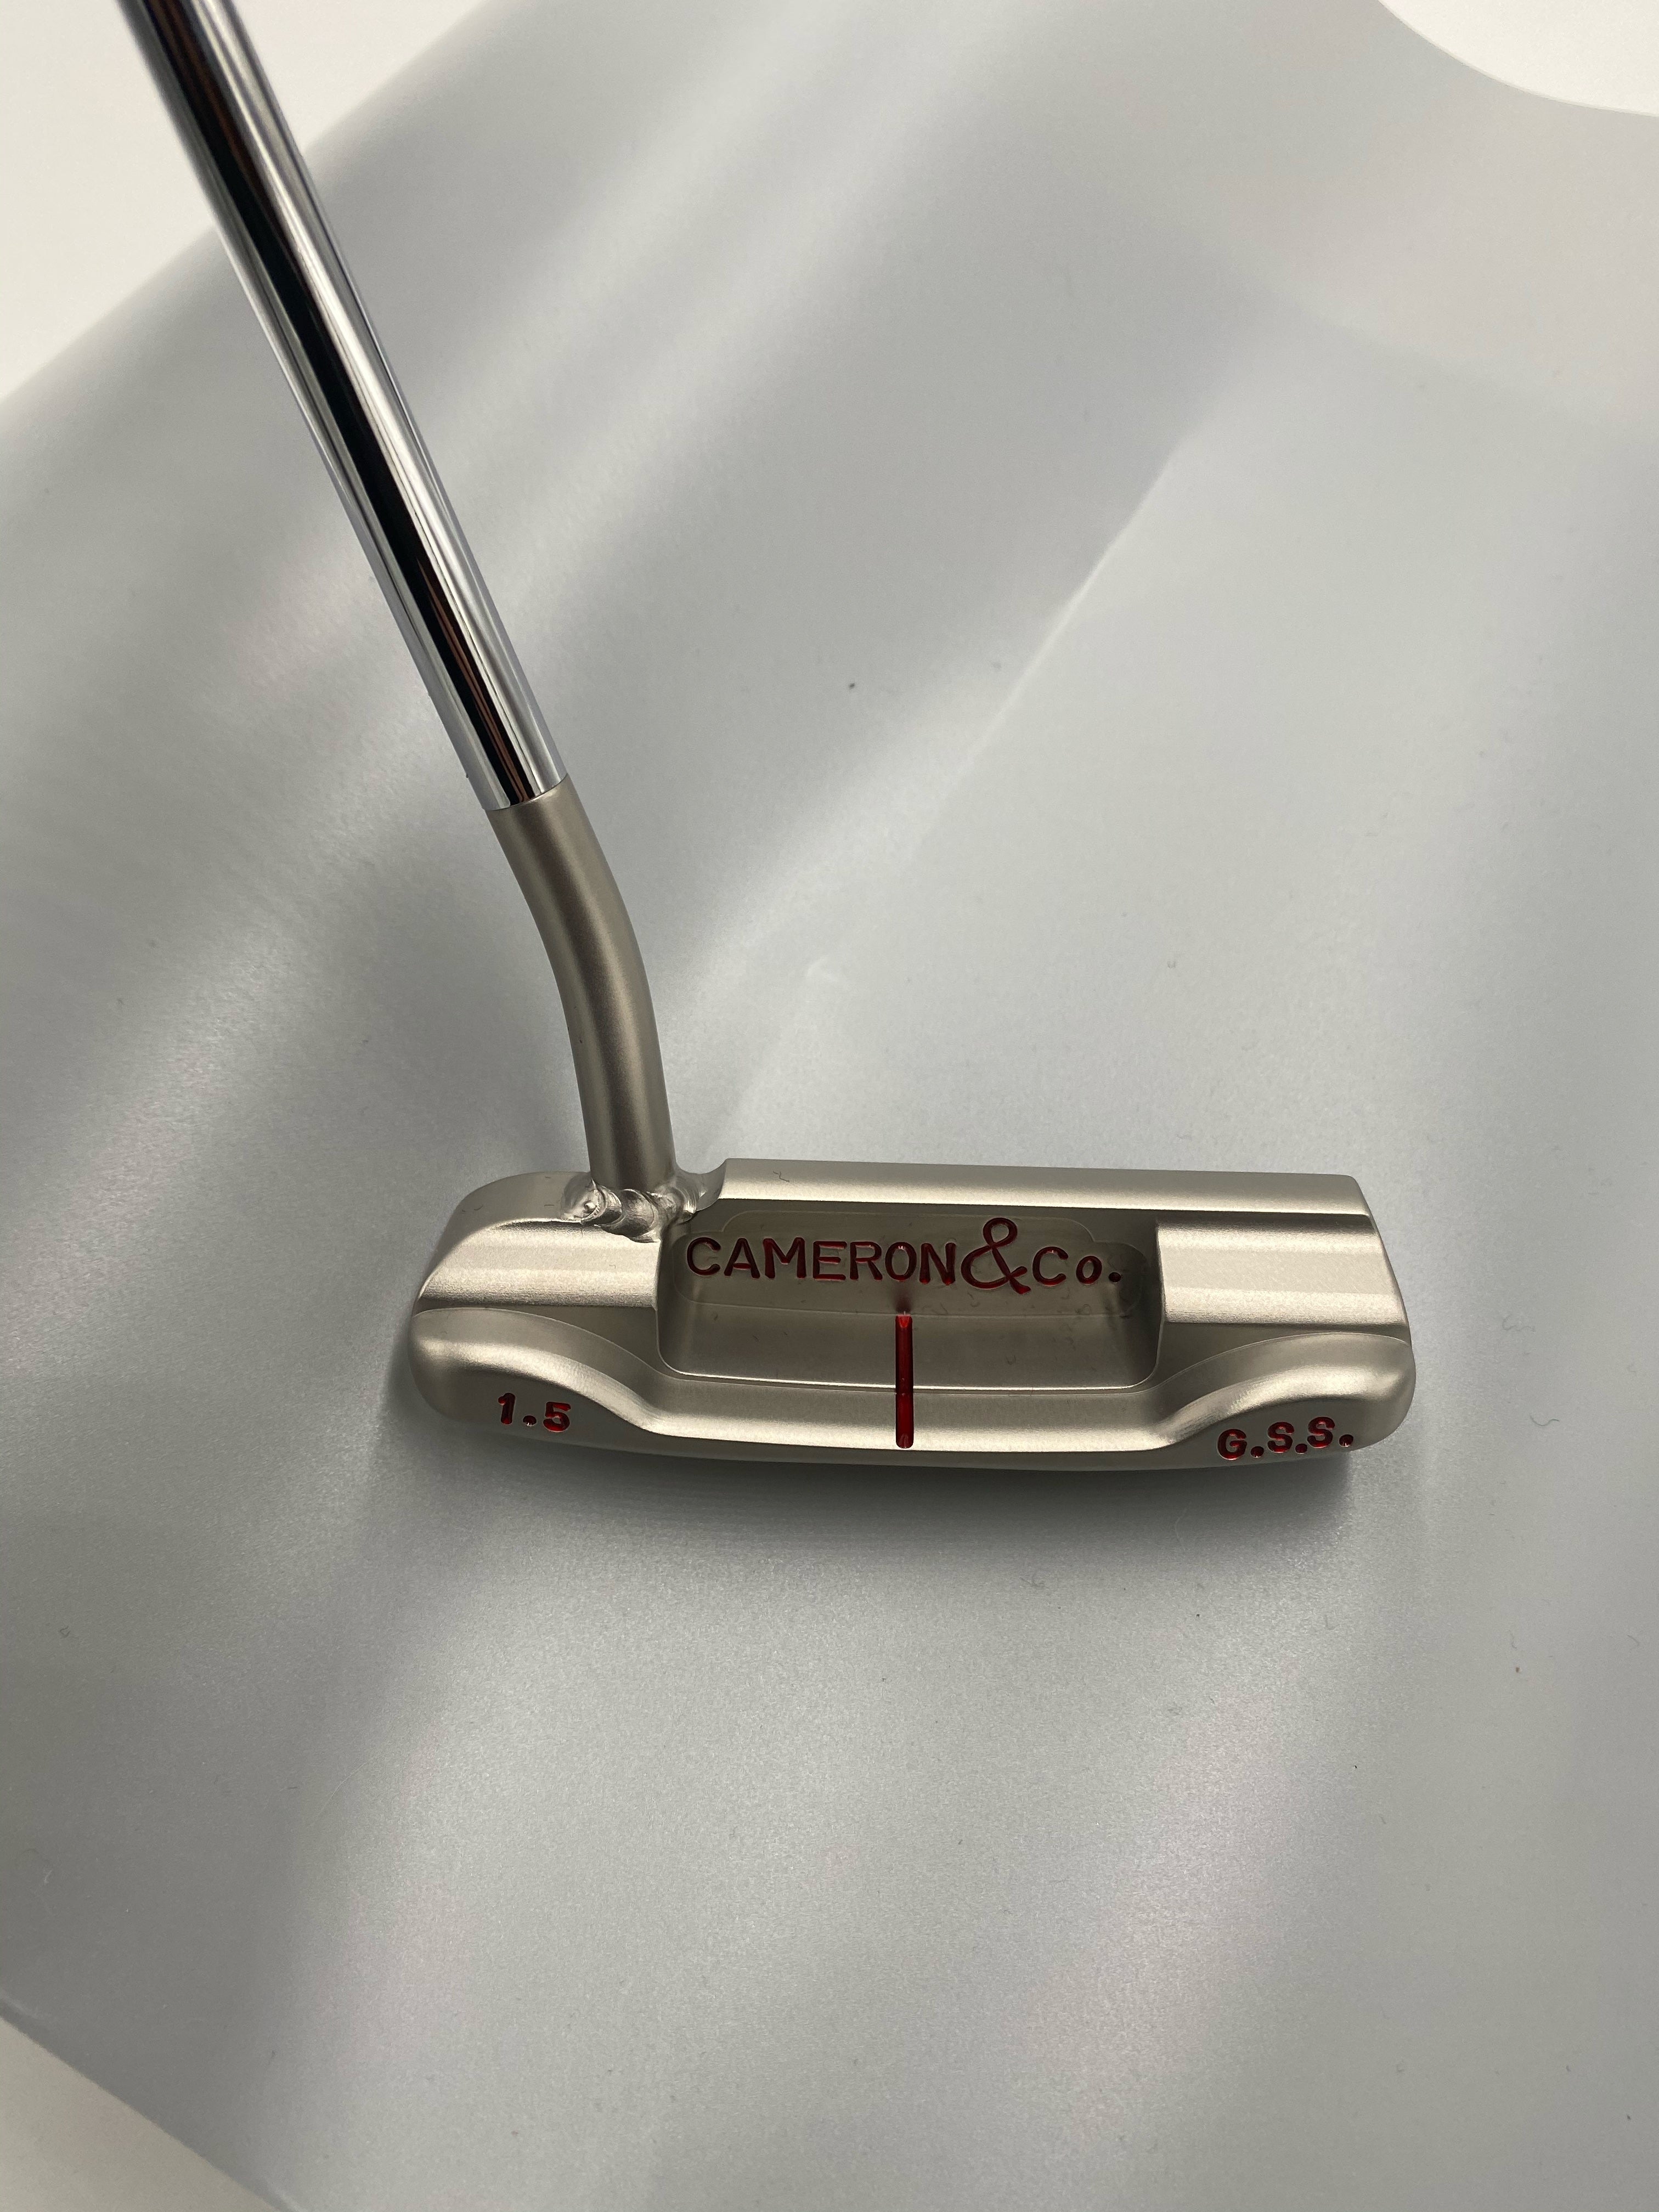 Scotty Cameron & Co. Masterful 009 1.5 GSS Welded Neck Tour Putter